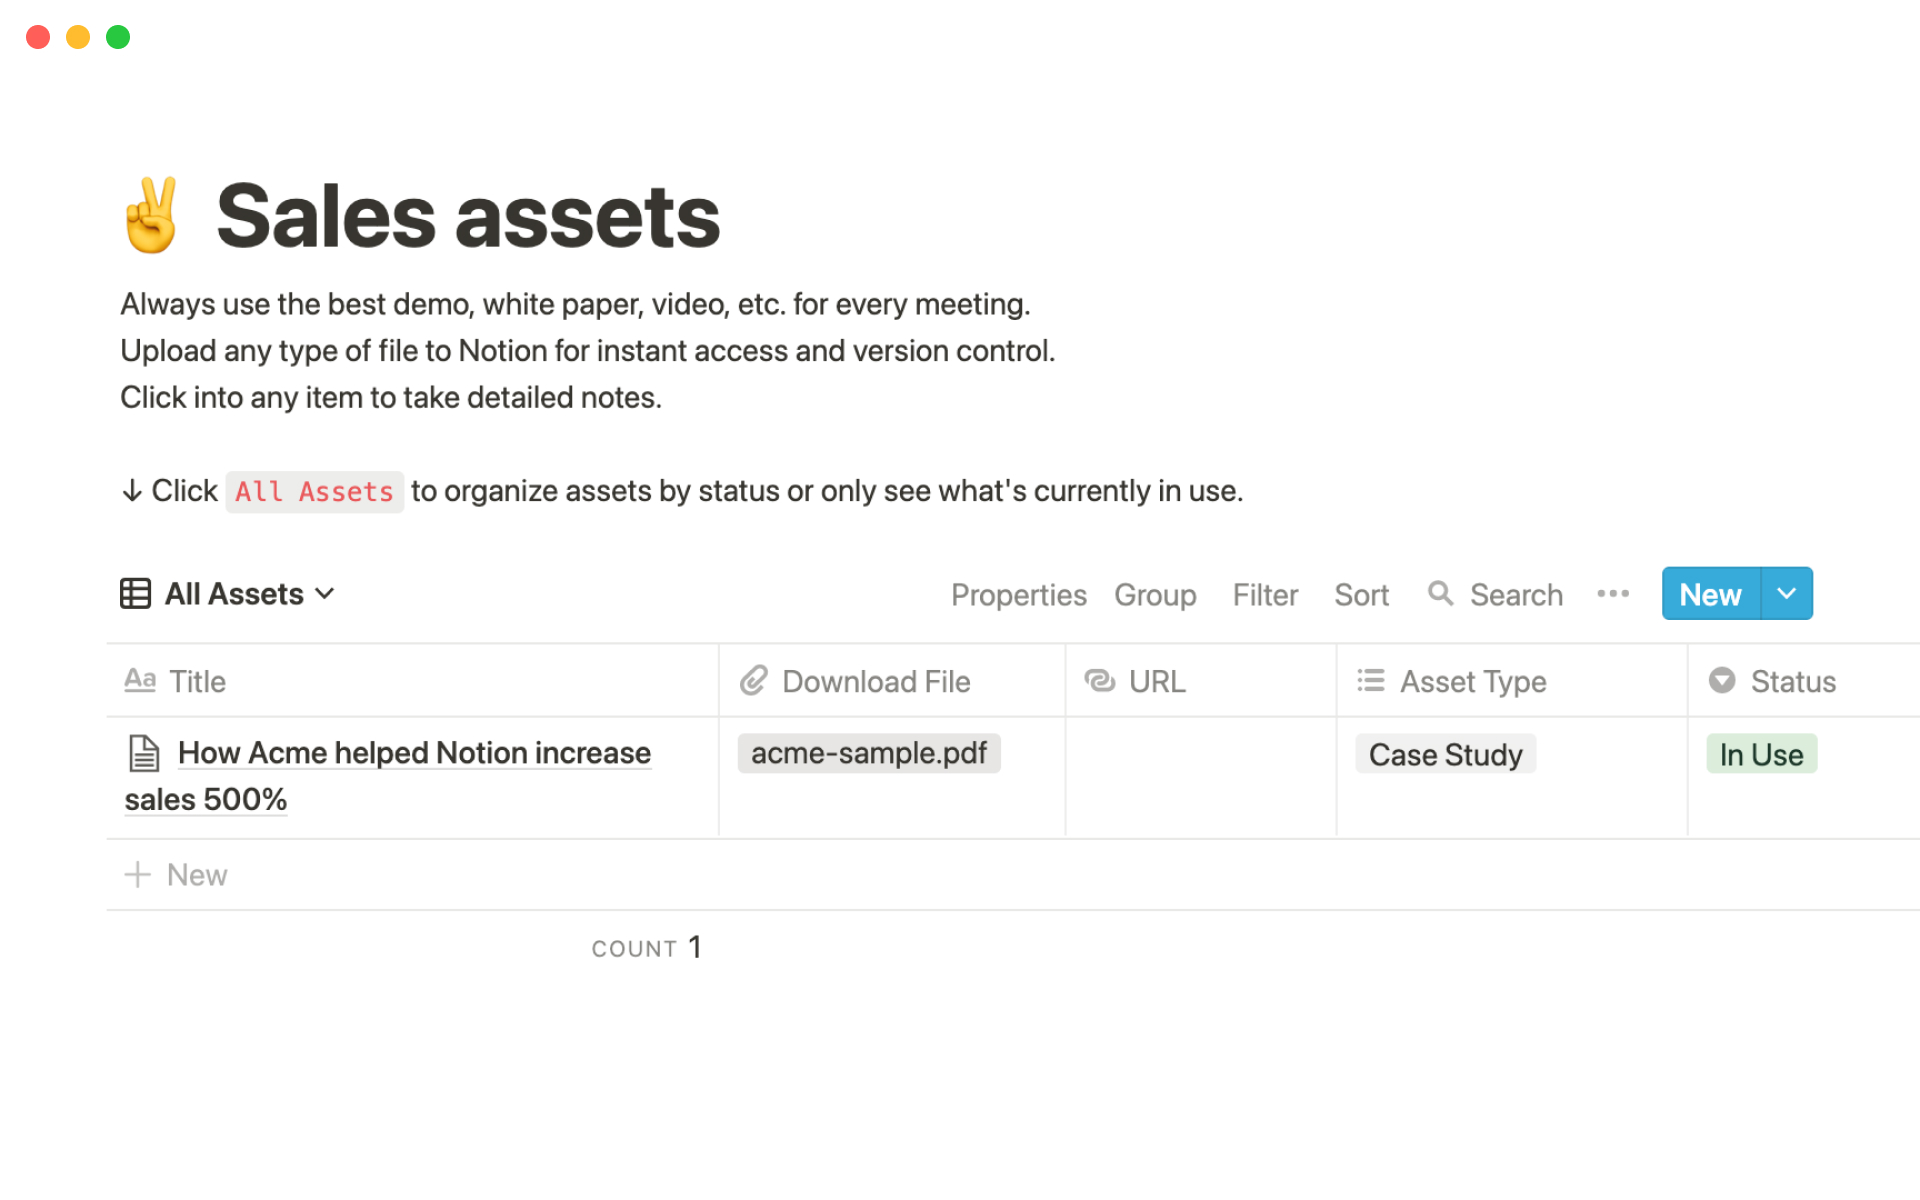 The desktop image for the Sales assets template